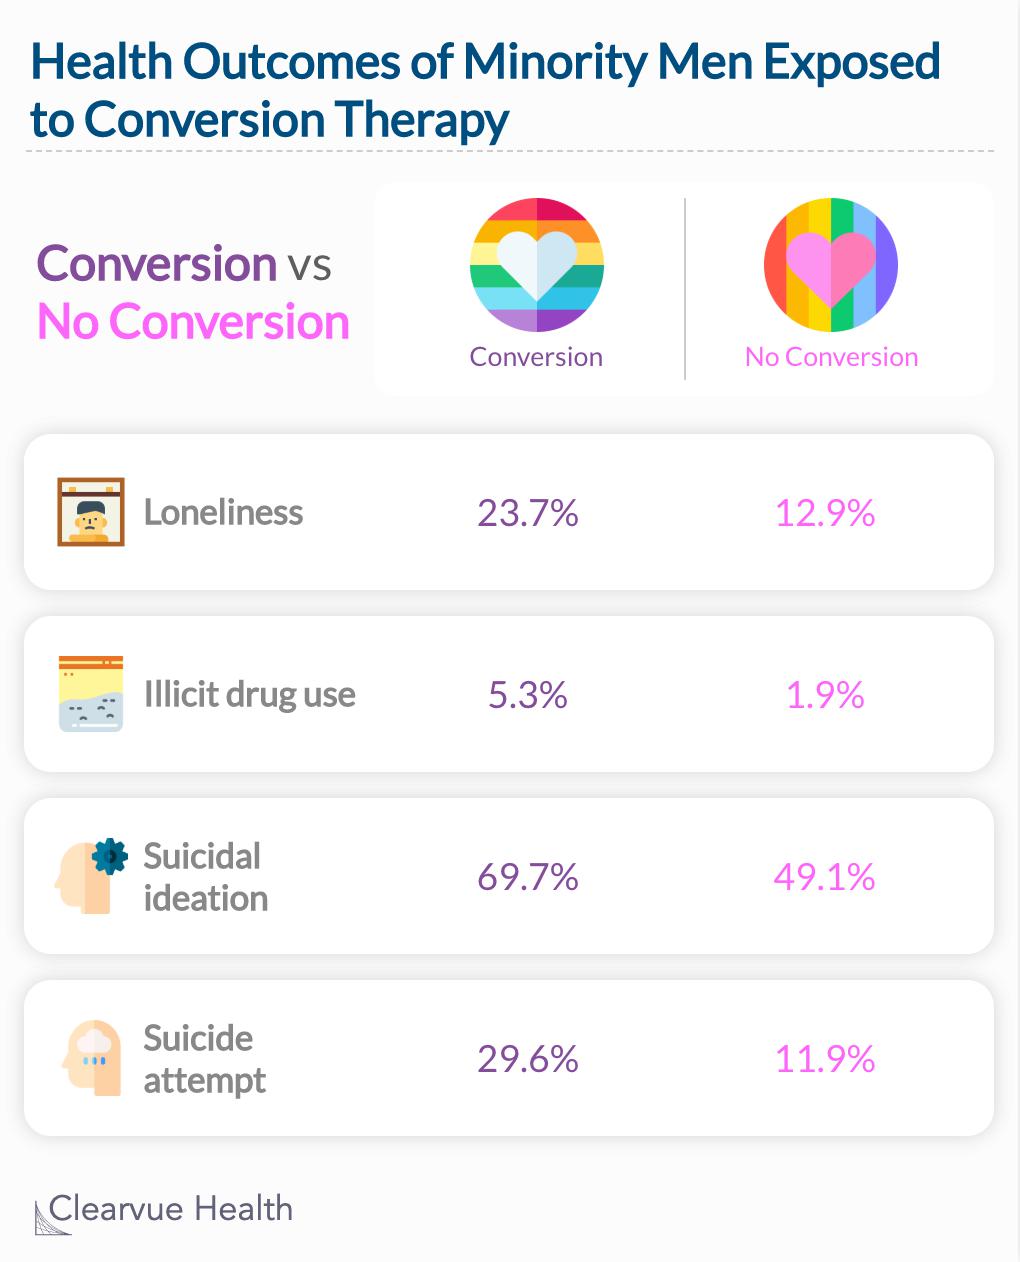 Minority men exposed to conversion therapy are more likely to feel lonely, use illicit drugs, have suicidal ideation, and have attempted suicide. 